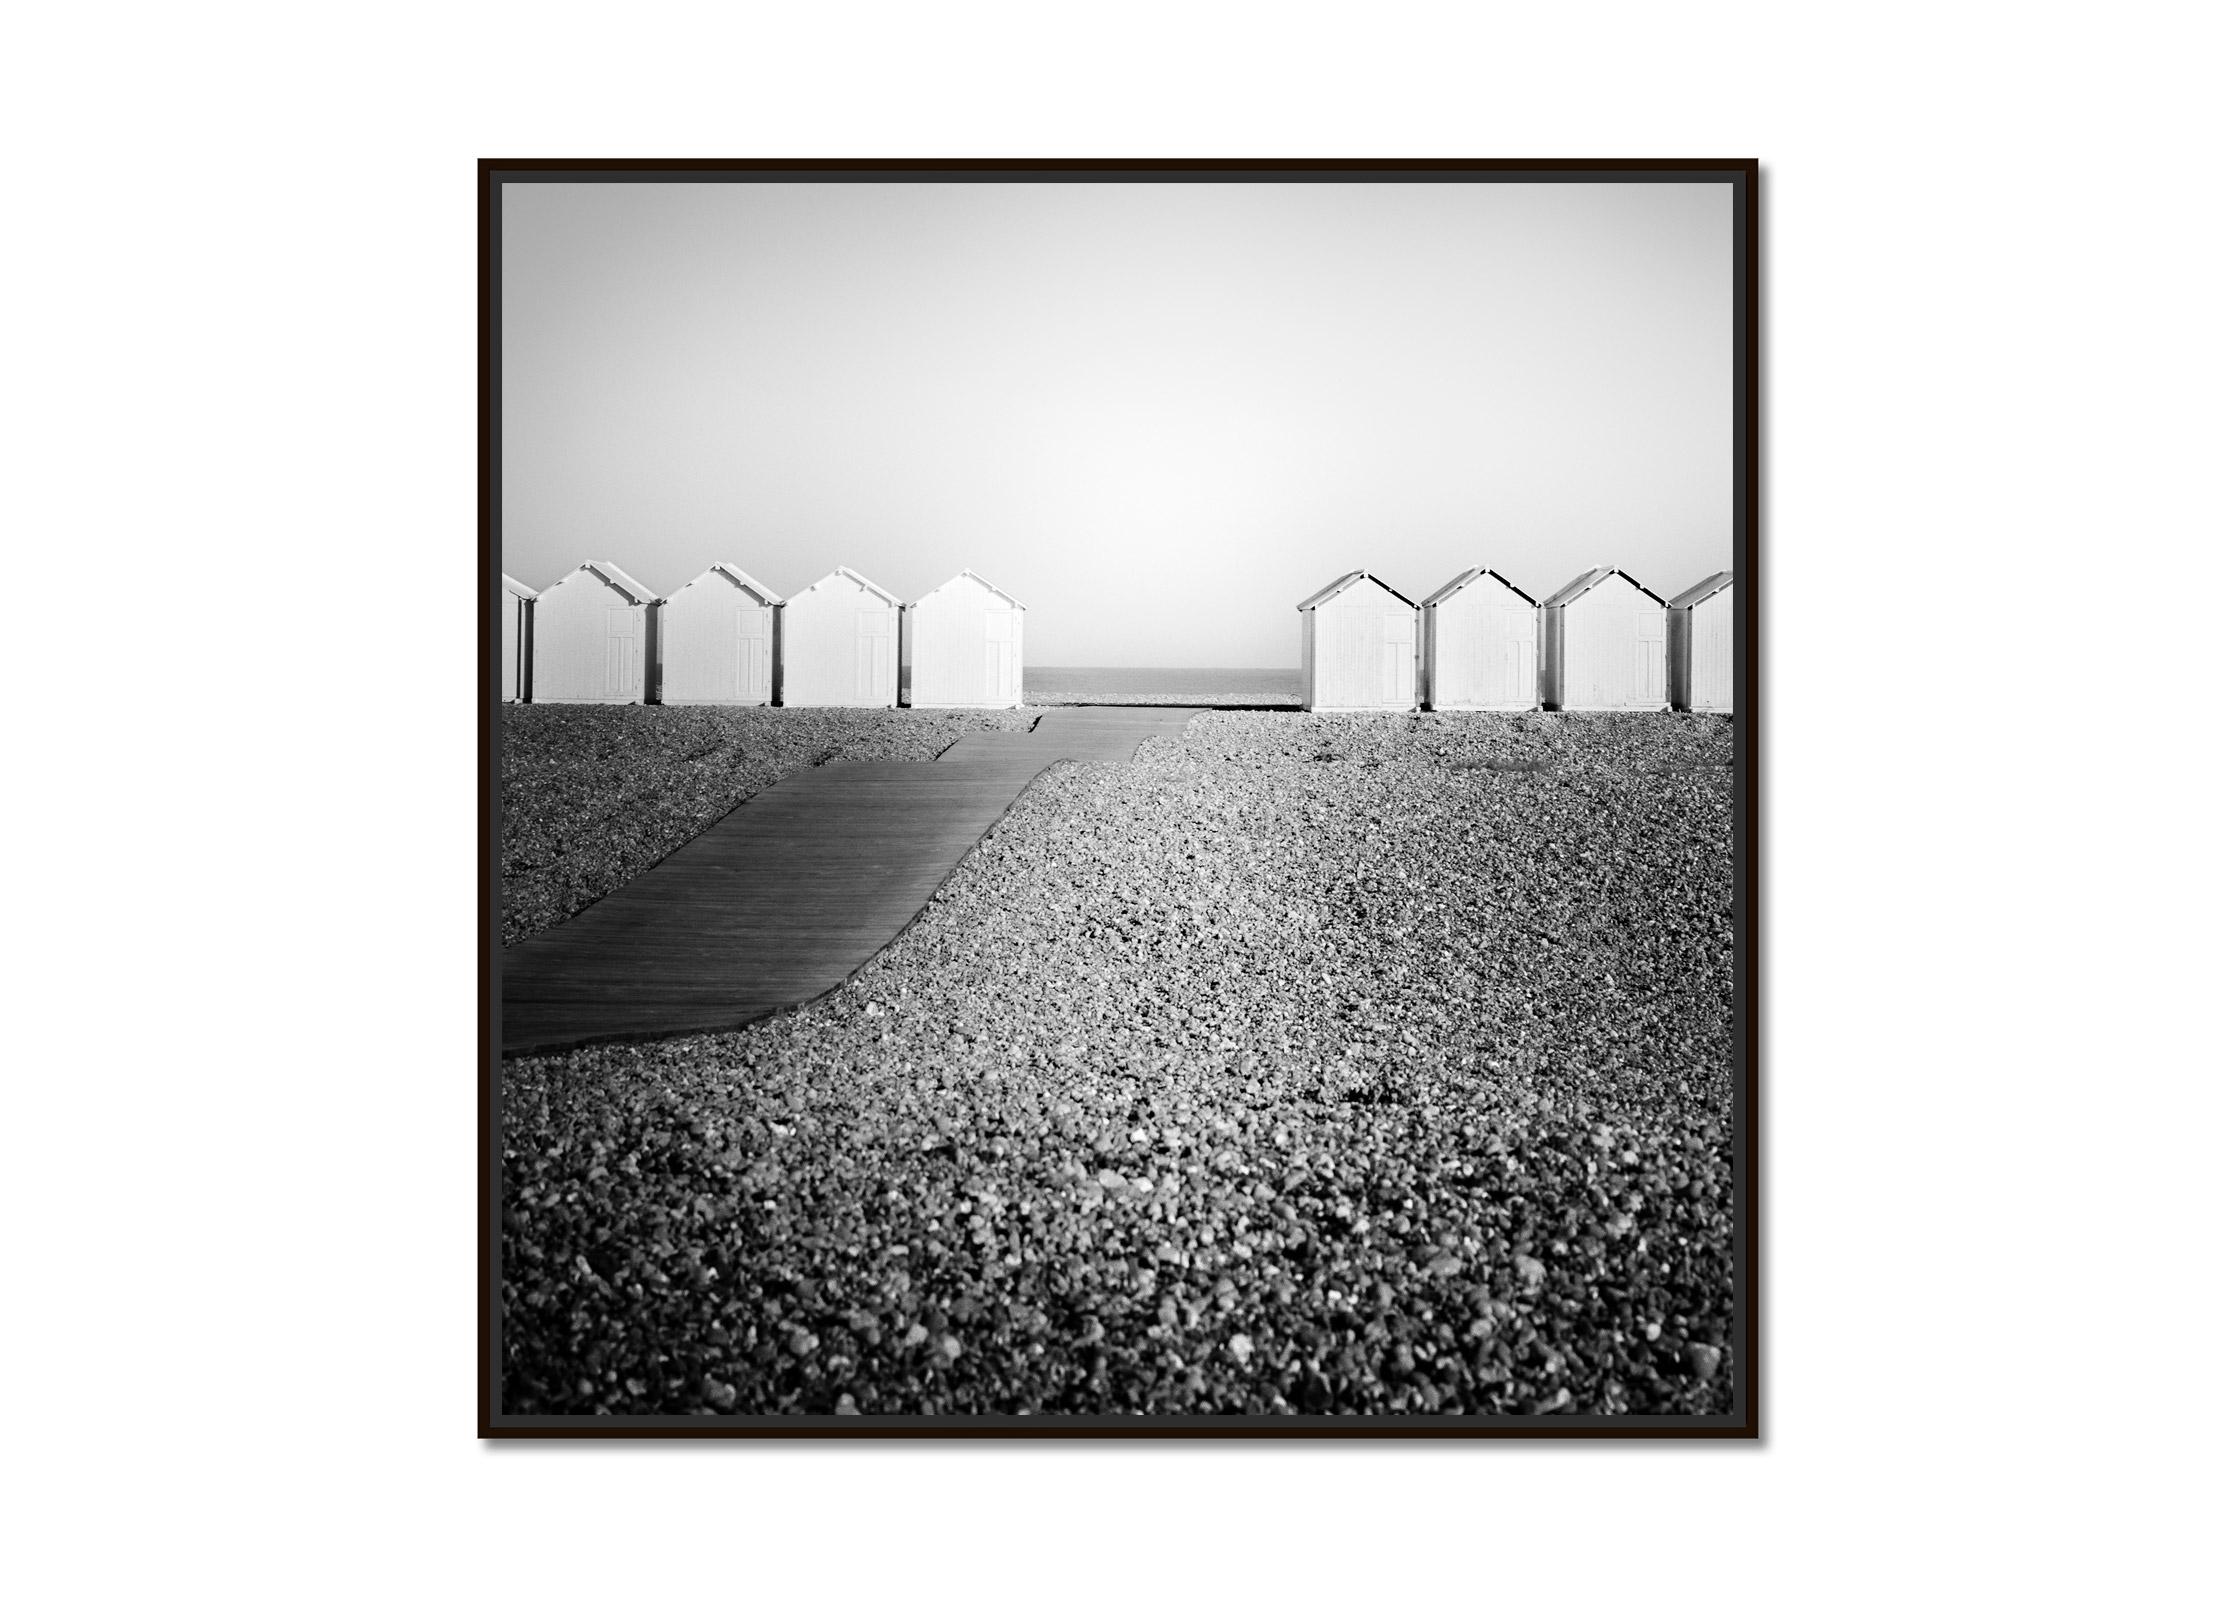 Wood Huts, Promenade, Rocky Beach, France, black and white landscape photography - Photograph by Gerald Berghammer